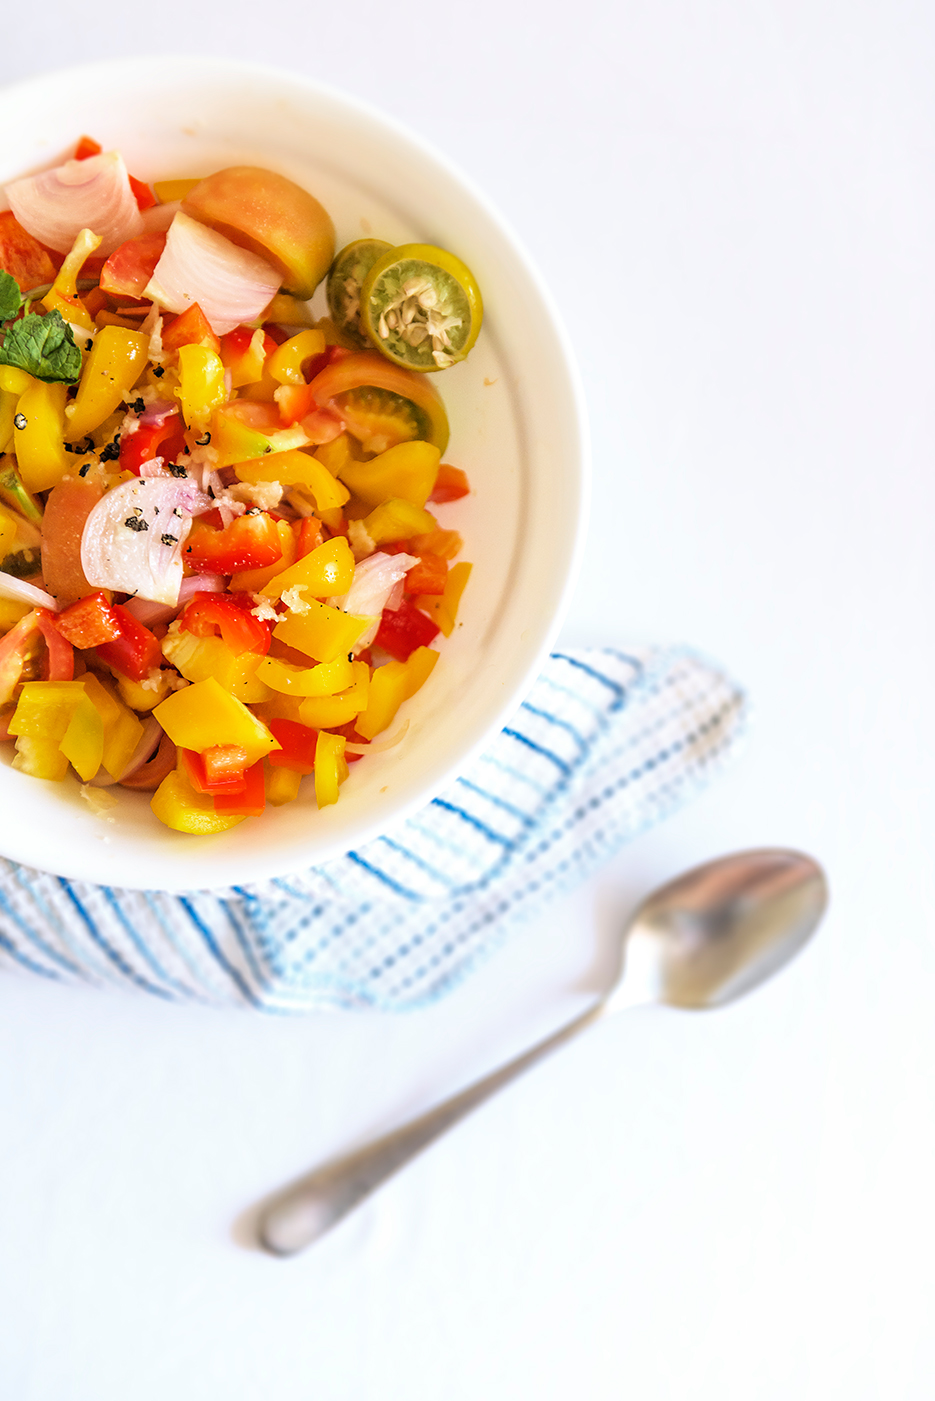 Bell Pepper, Tomato & Onion Salad. Food photography. Photography by professional Indian lifestyle photographer Naina Redhu of Naina.co